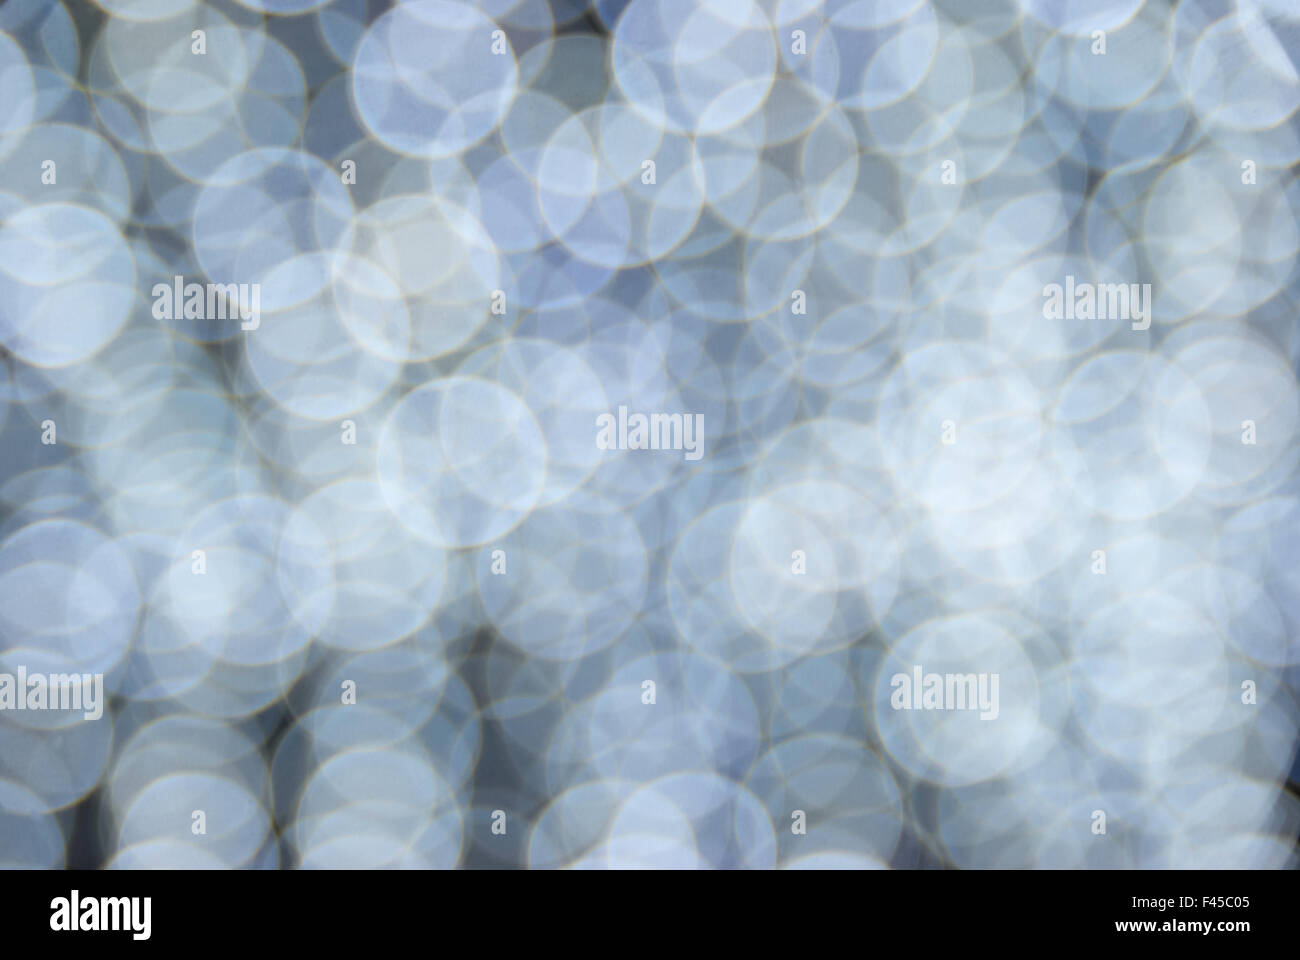 Abstract white lights Stock Photo